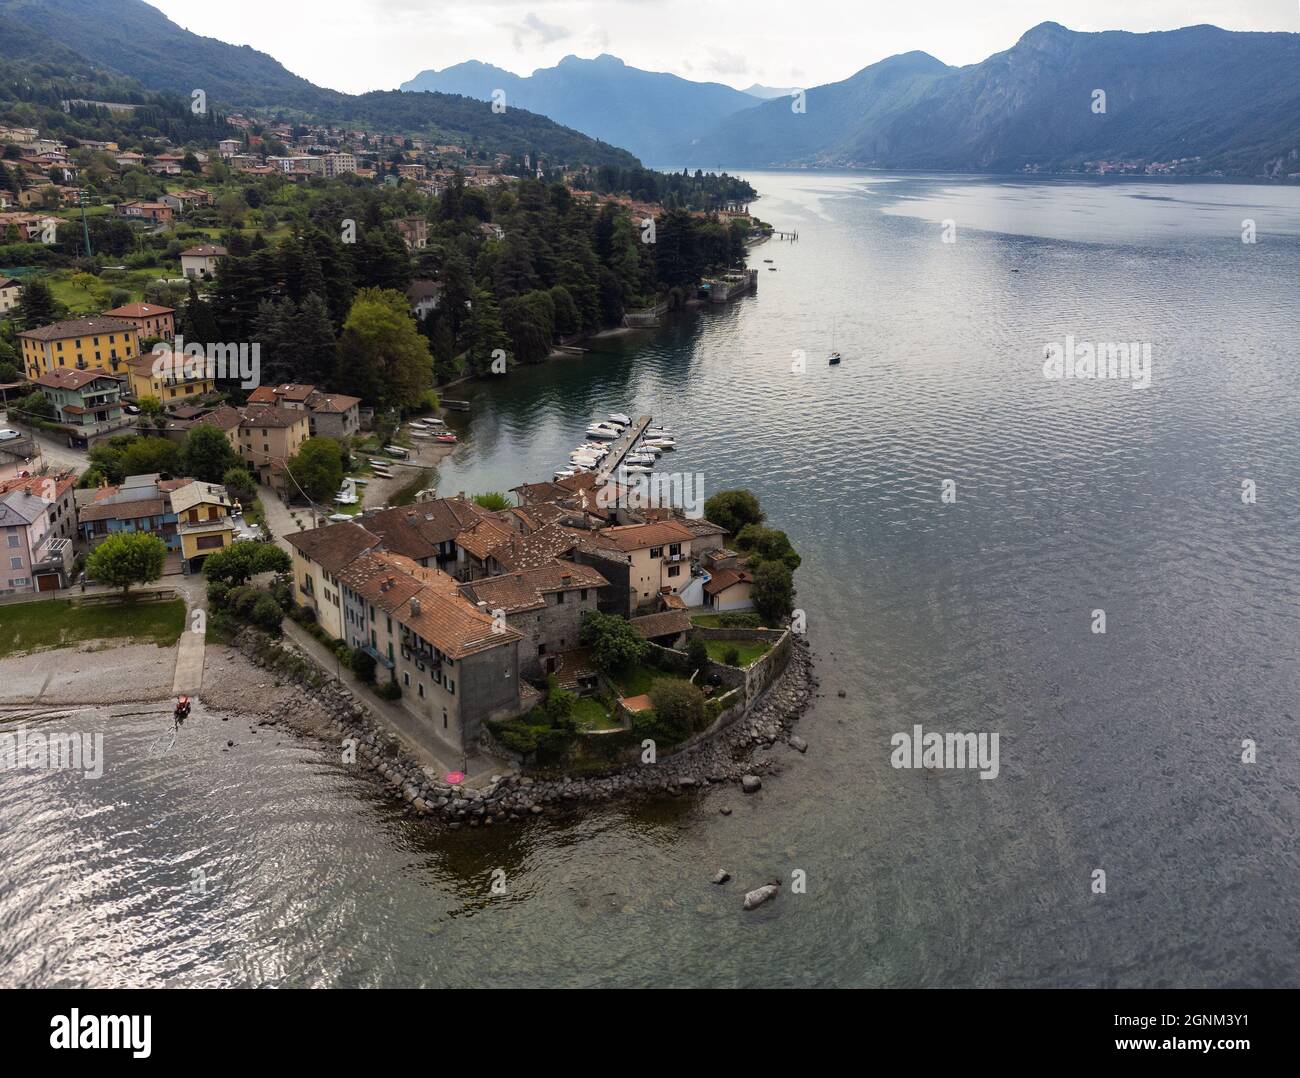 Small village located on a peninsula of Lake Como next to a marina with moored boats - Aerial View,  Lierna, Lombardy, Italy Stock Photo